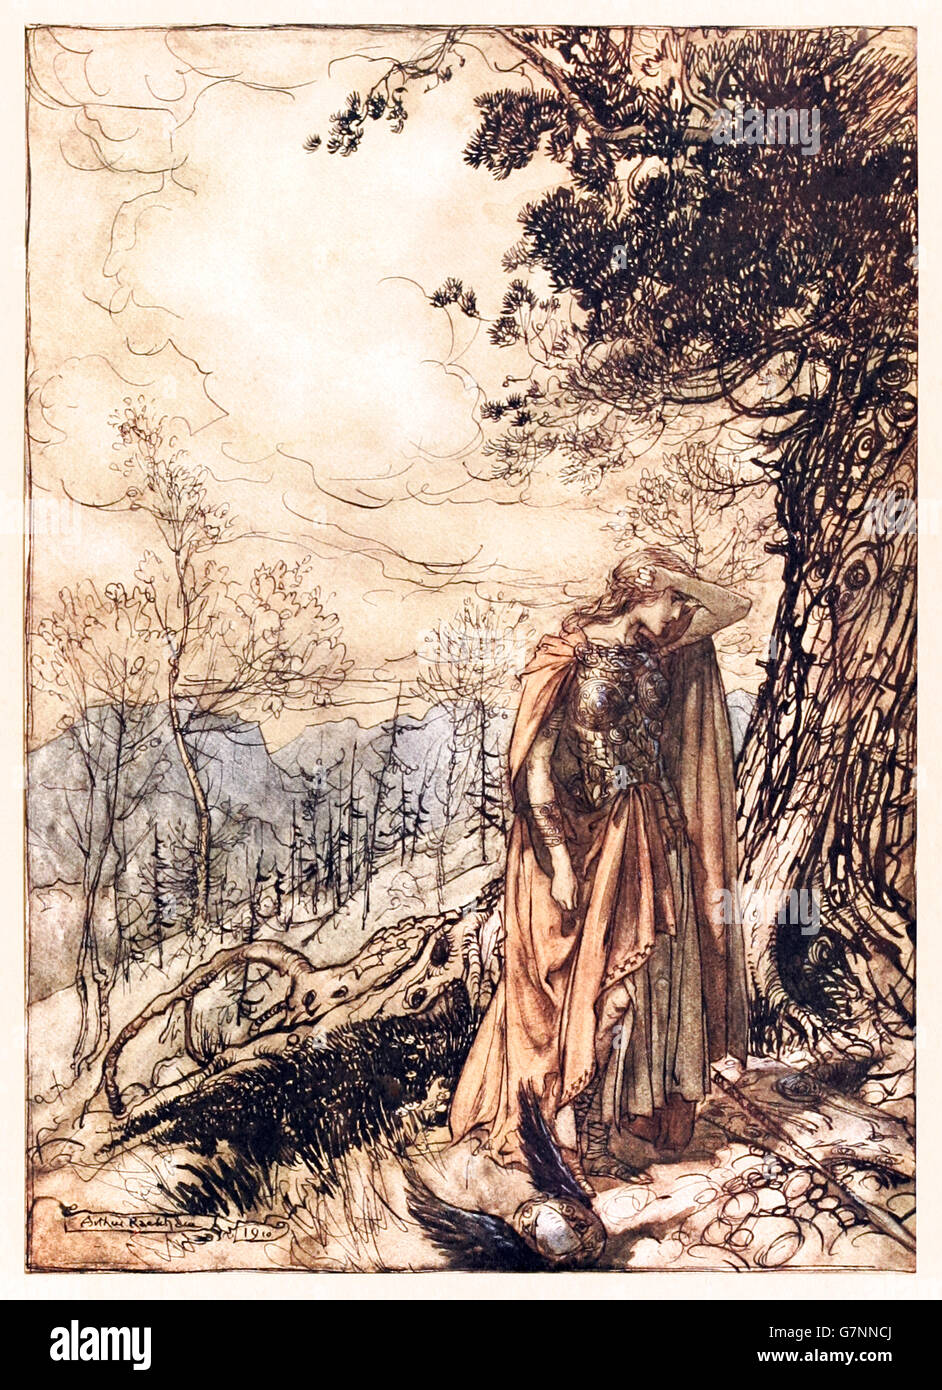 “Brunnhilde stands for a long time dazed and alarmed” from ‘The Rhinegold & the Valkyrie’ illustrated by Arthur Rackham (1867-1939), published in 1910. Brunnhilde is shocked that her father Wotan wants her to ensure Hunding wins the battle against Siegmund, Wotan's beloved son. Stock Photo